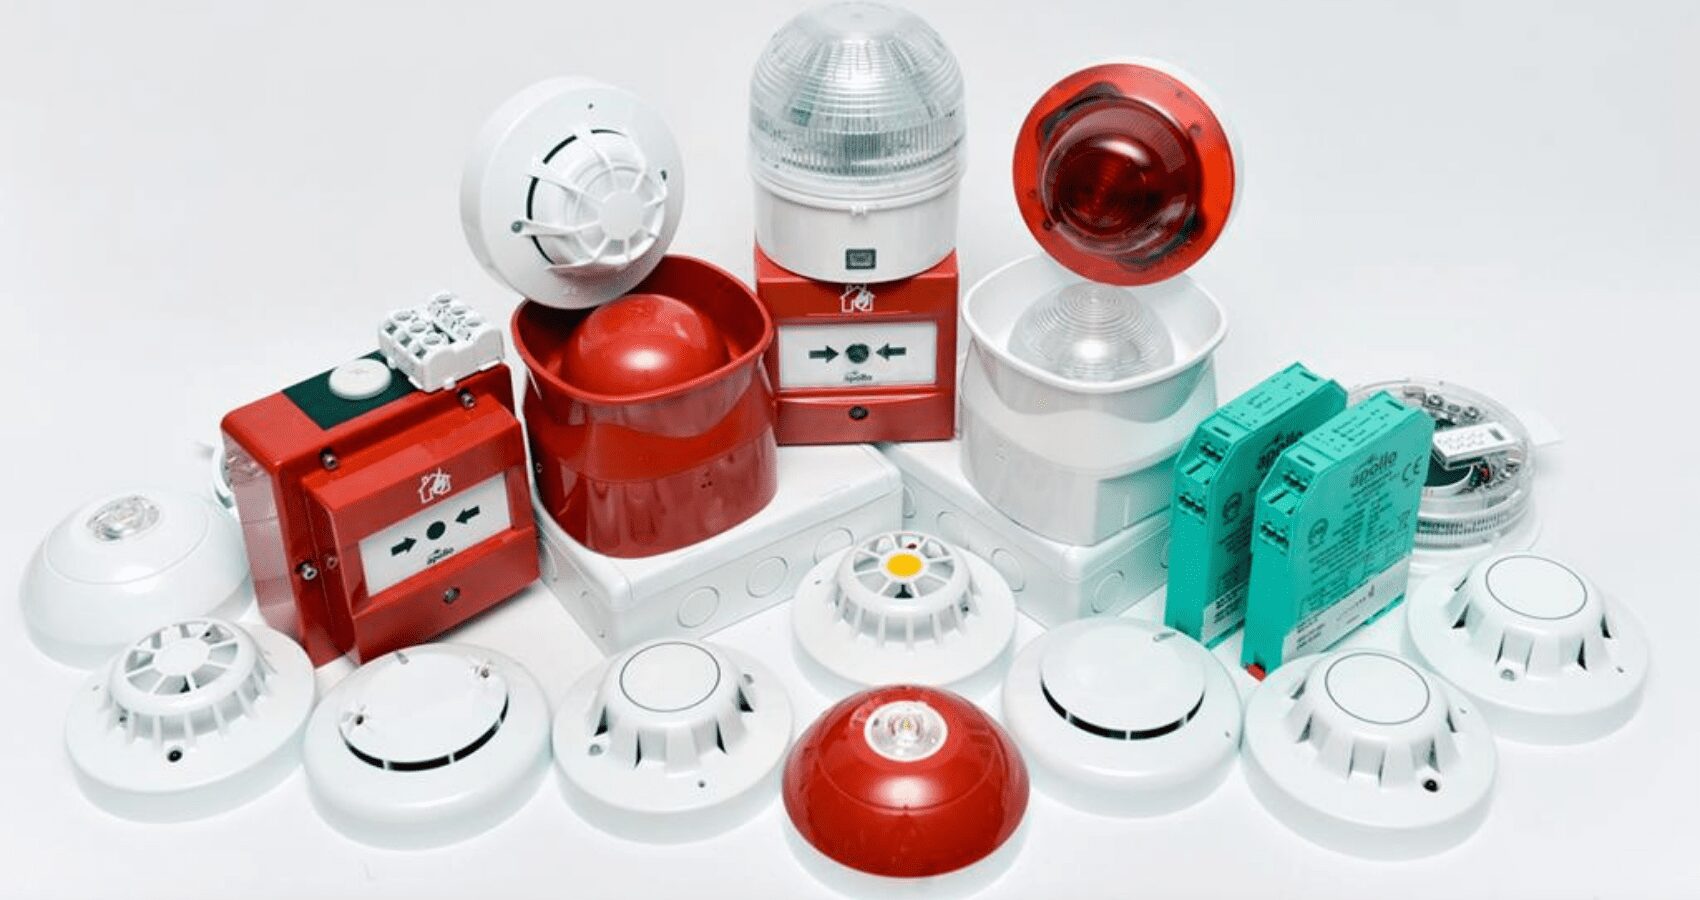 Fire safety systems